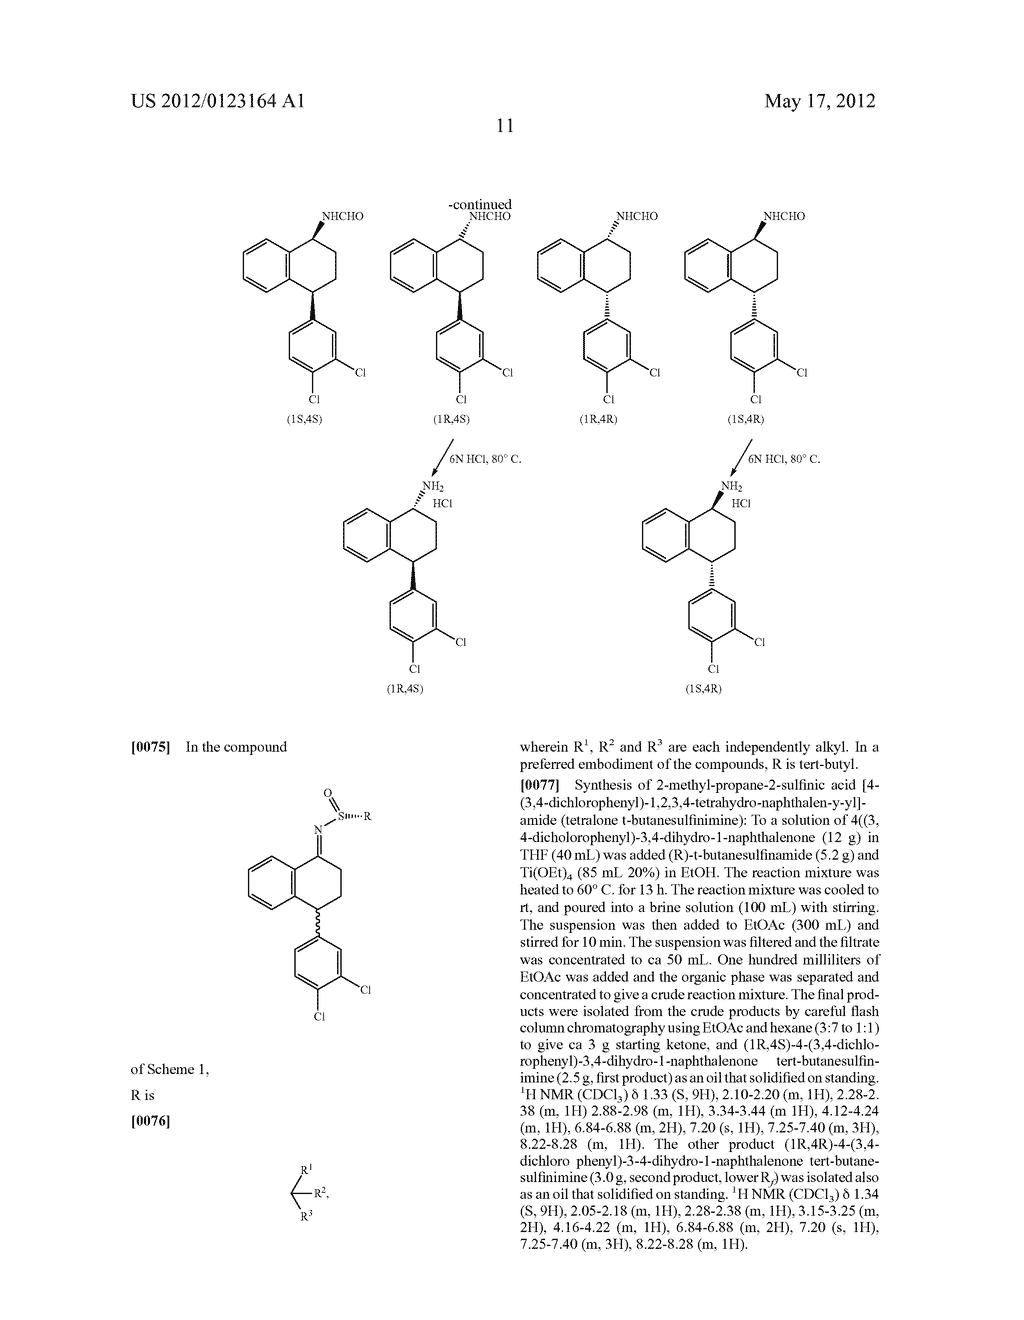 Combinations of Eszopiclone and Trans     4-(3,4-Dichlorophenyl)-1,2,3,4-Tetrahydro-N-Methyl-1-Napthalenamine or     Trans 4-(3,4-Dichlorophenyl)-1,2,3,4-Tetrahydro-1-Napthalenamine, and     Methods of Treatment of Menopause and Mood, Anxiety, and Cognitive     Disorders - diagram, schematic, and image 12